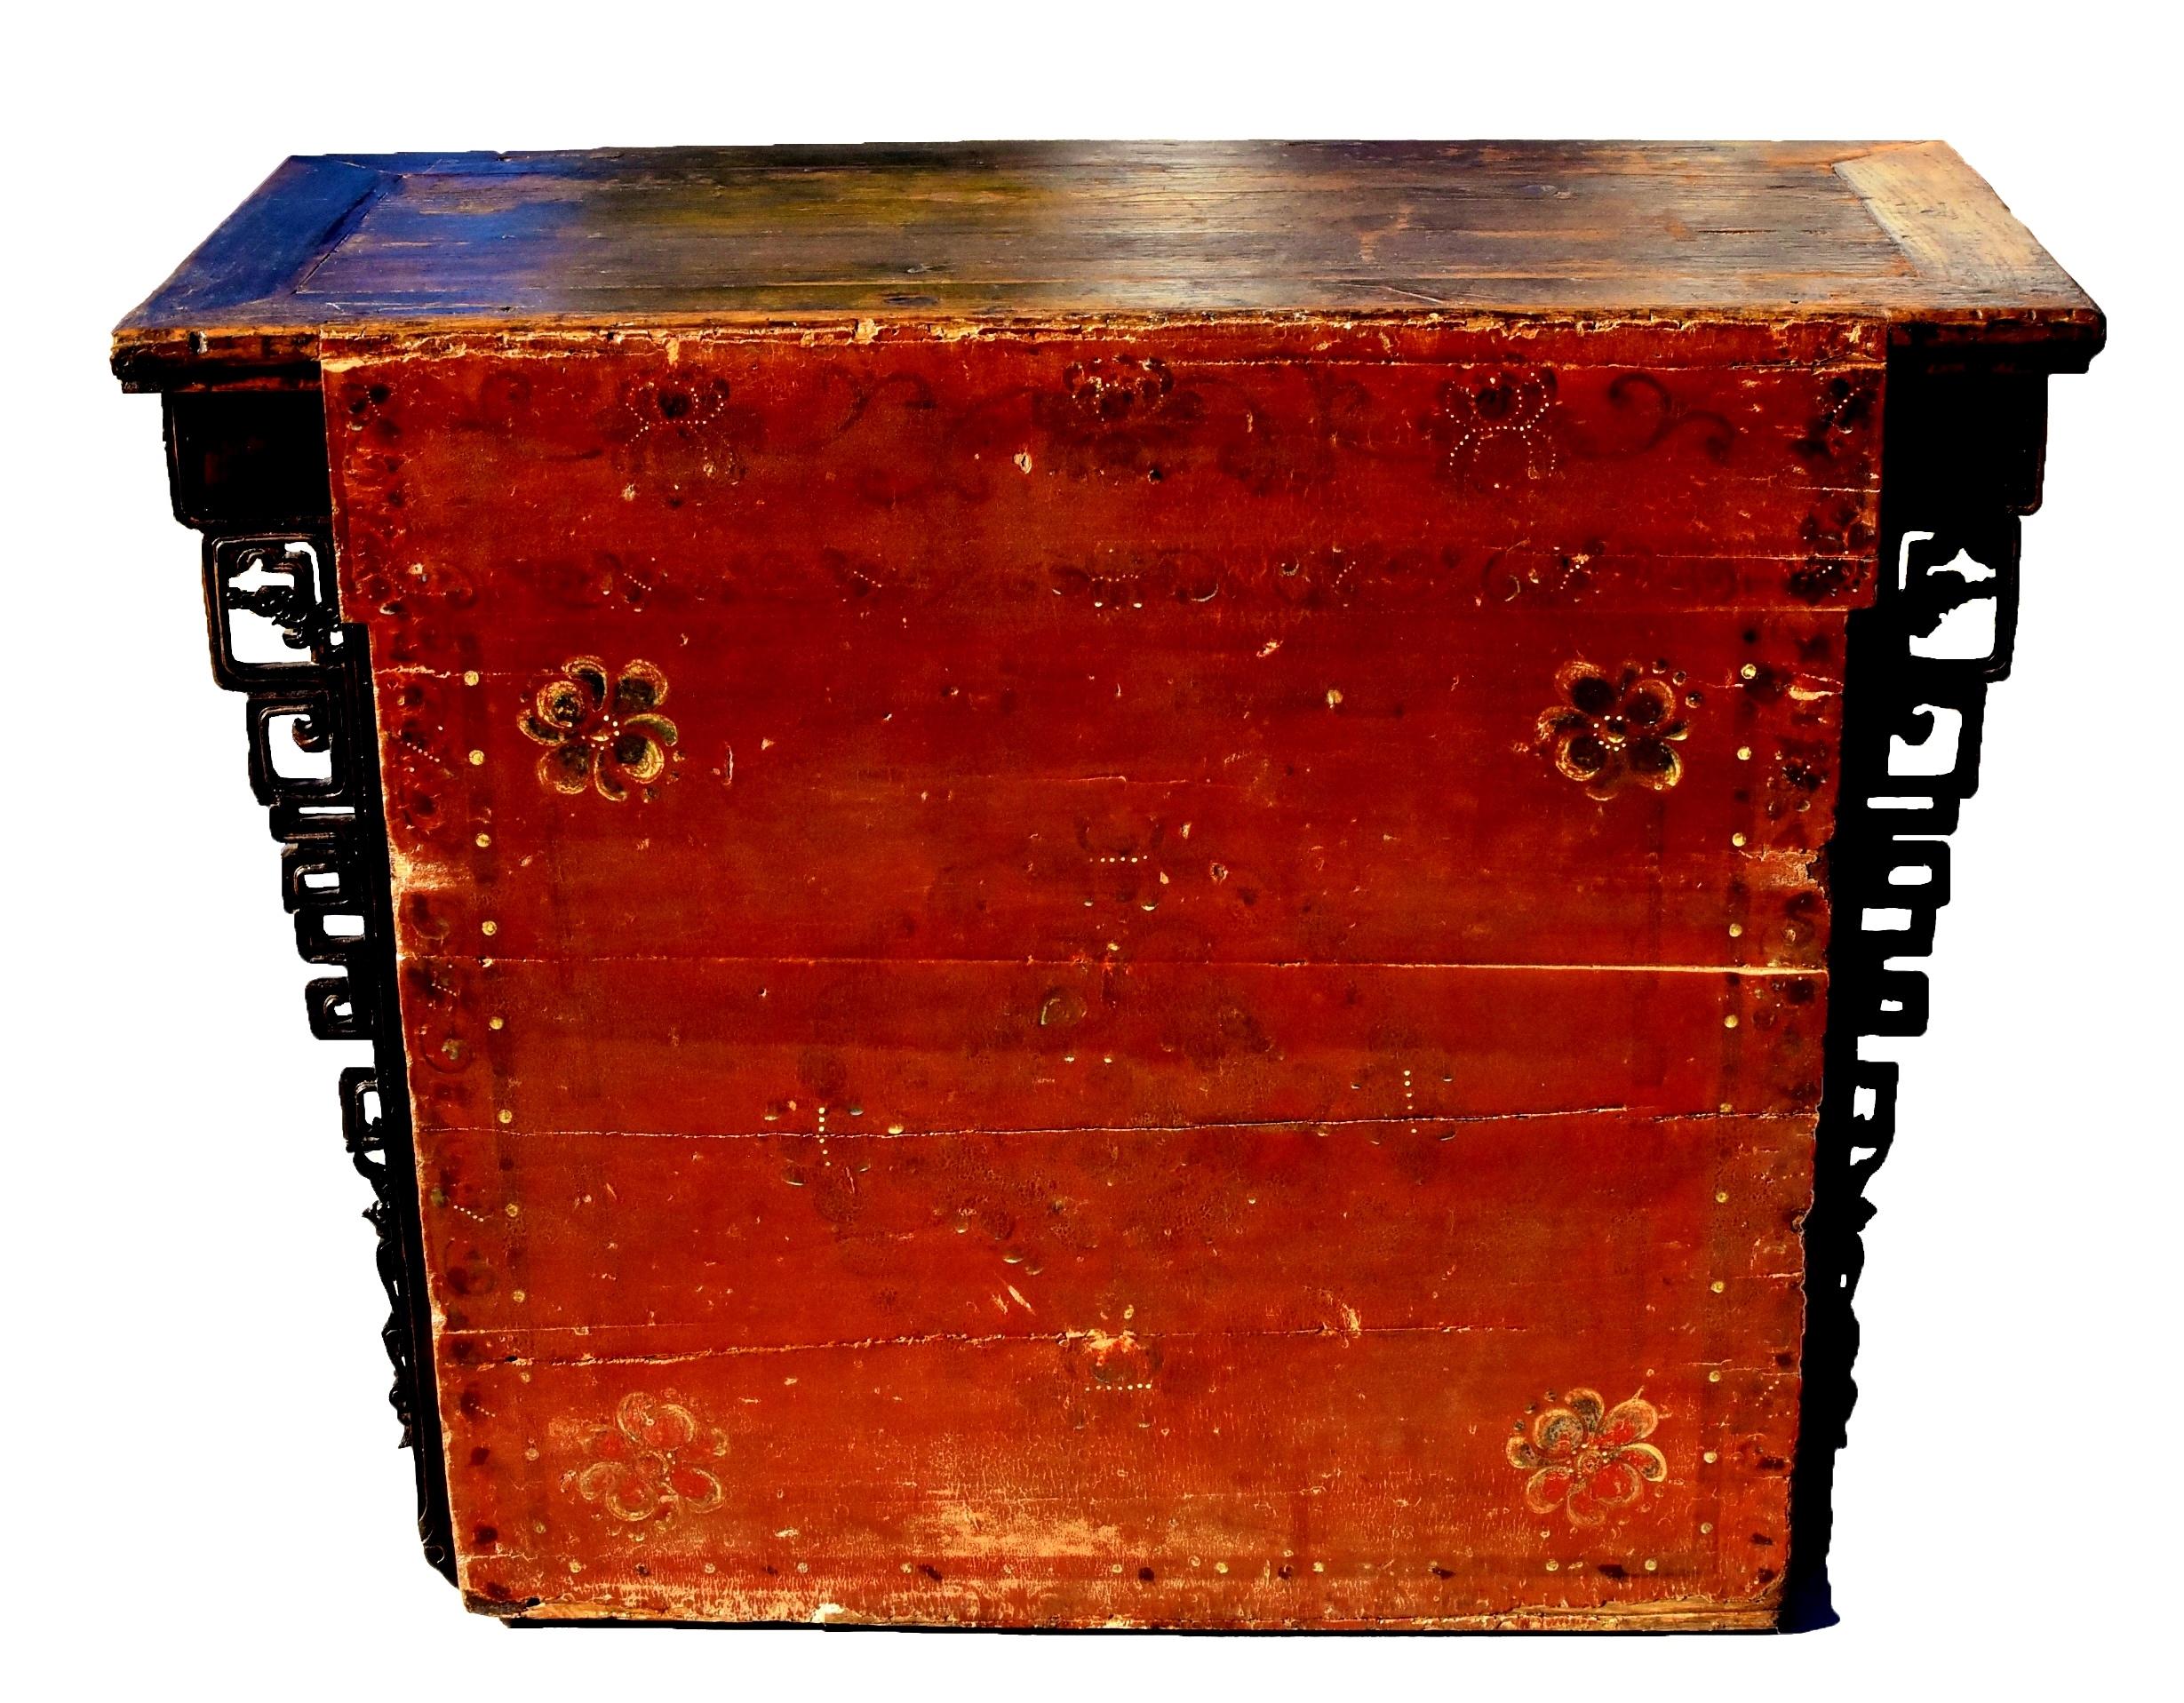 A beautiful, 19th century chest from Inner Mongolia. The top is of miter, tenon and mortise construction encasing a single board floating panel. Full apron depicts traditional Mongolian motifs of blossoms in circular form, hand painted in gorgeous